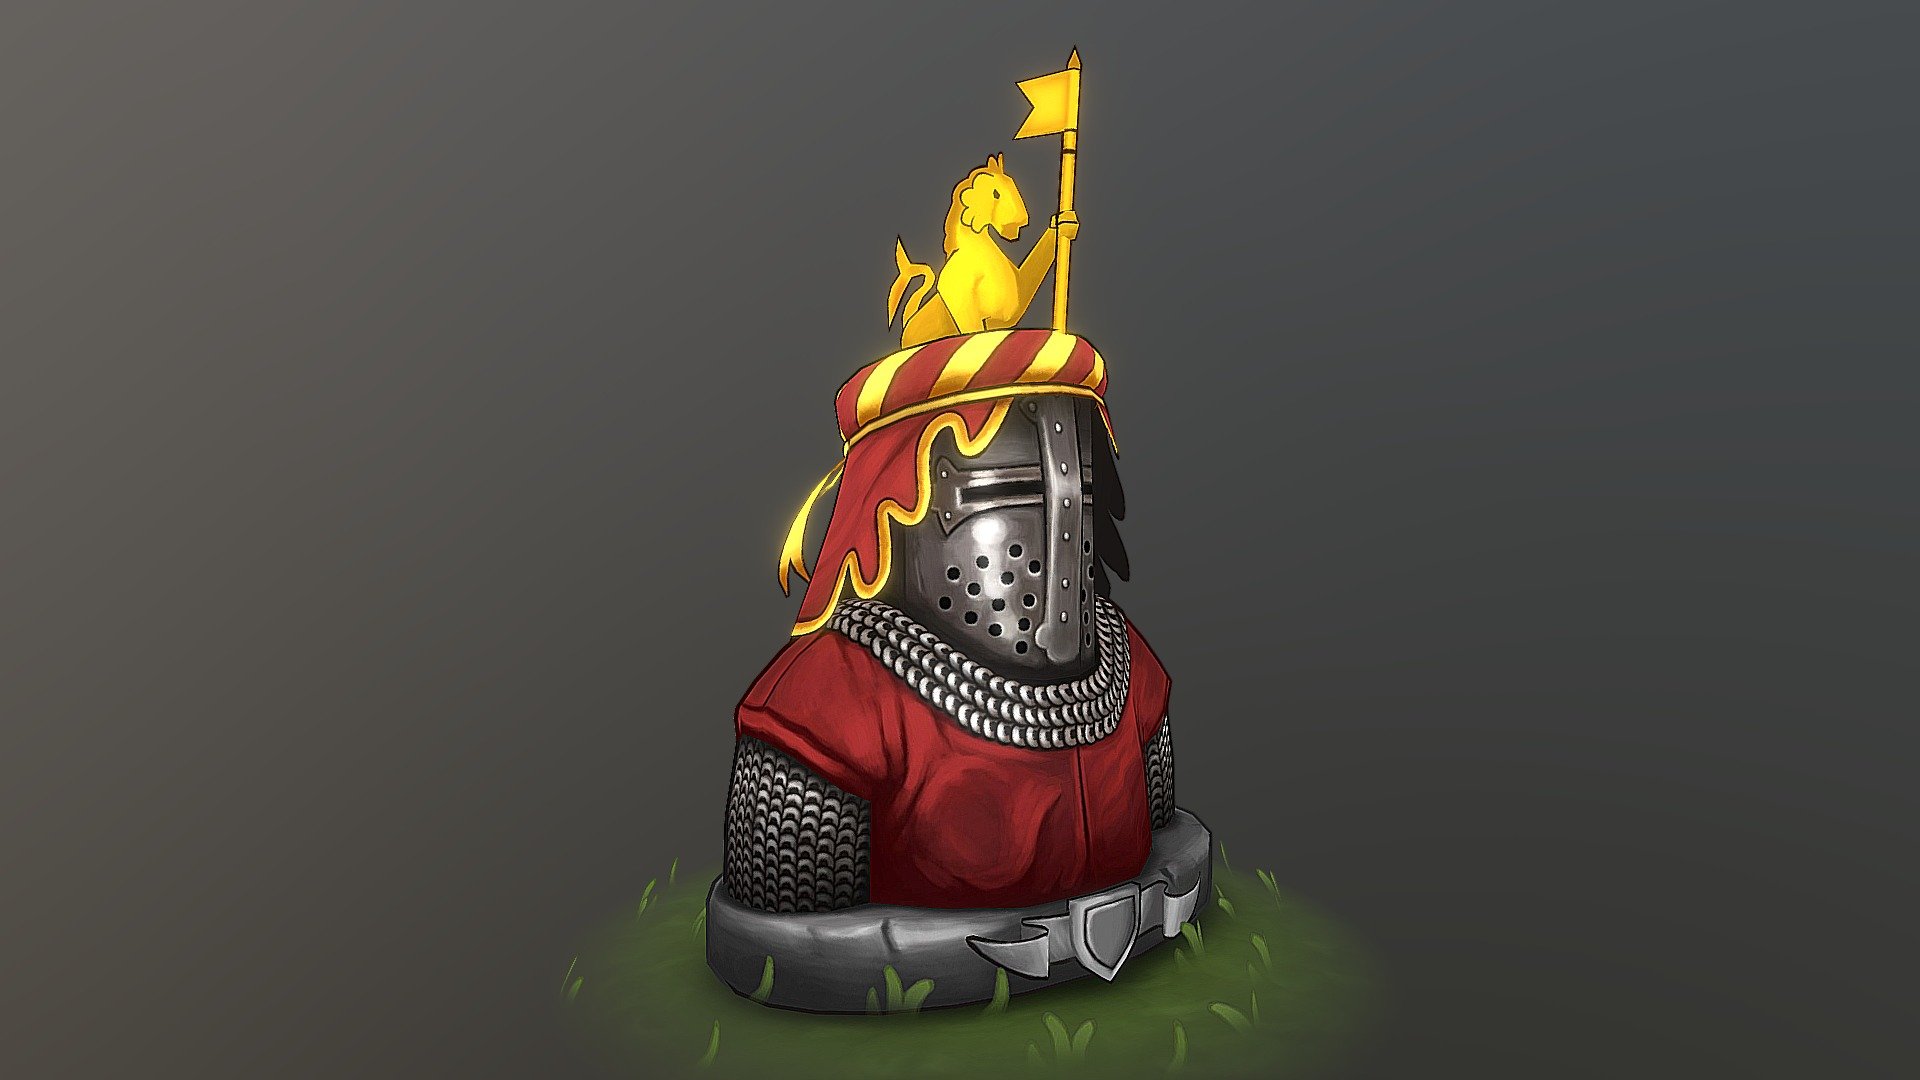 Inspired by Paul Taaks' art, I decided to create a piece of 3D fanart for Battle Brothers game. Character depicts one of the knights of the Noble house 3d model